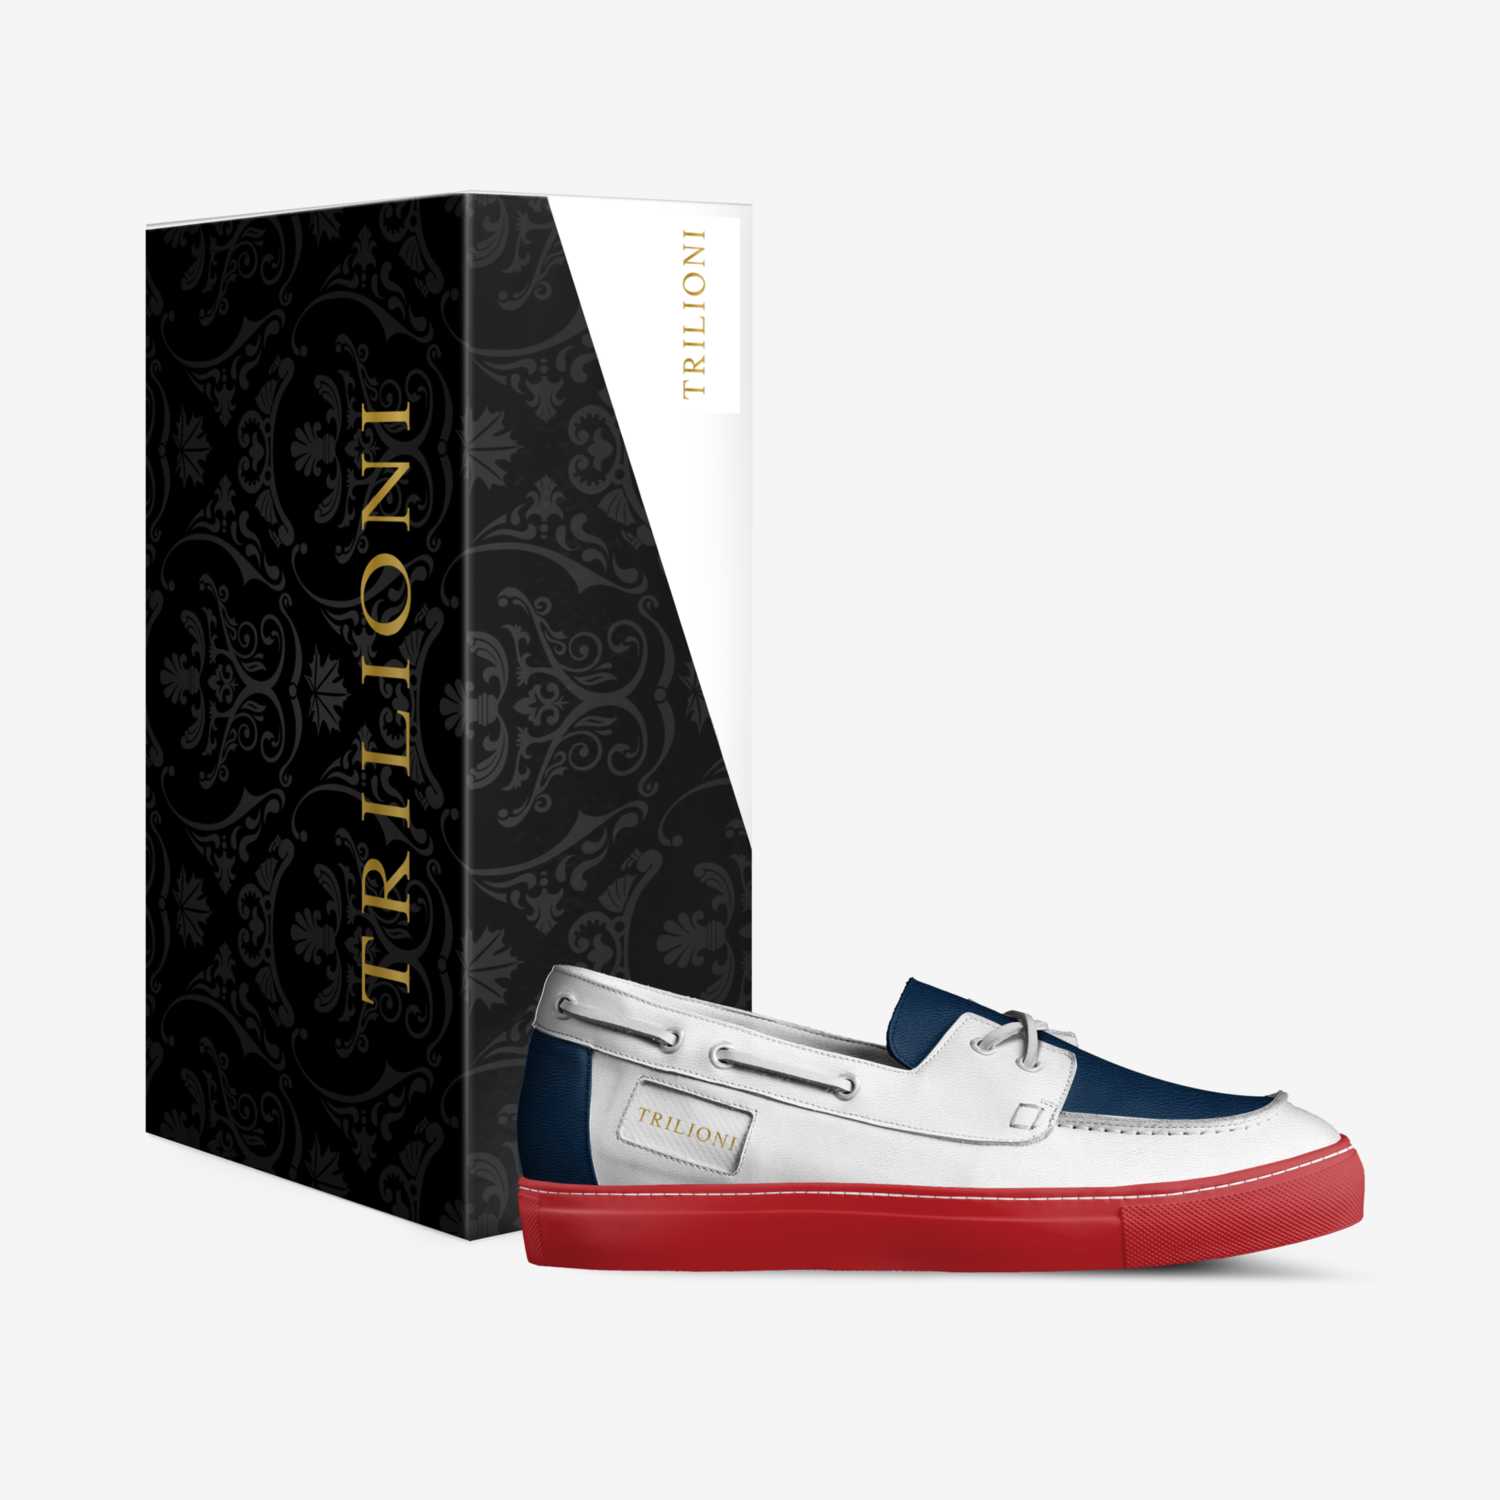 Trilioni Americo custom made in Italy shoes by Jay Frye | Box view